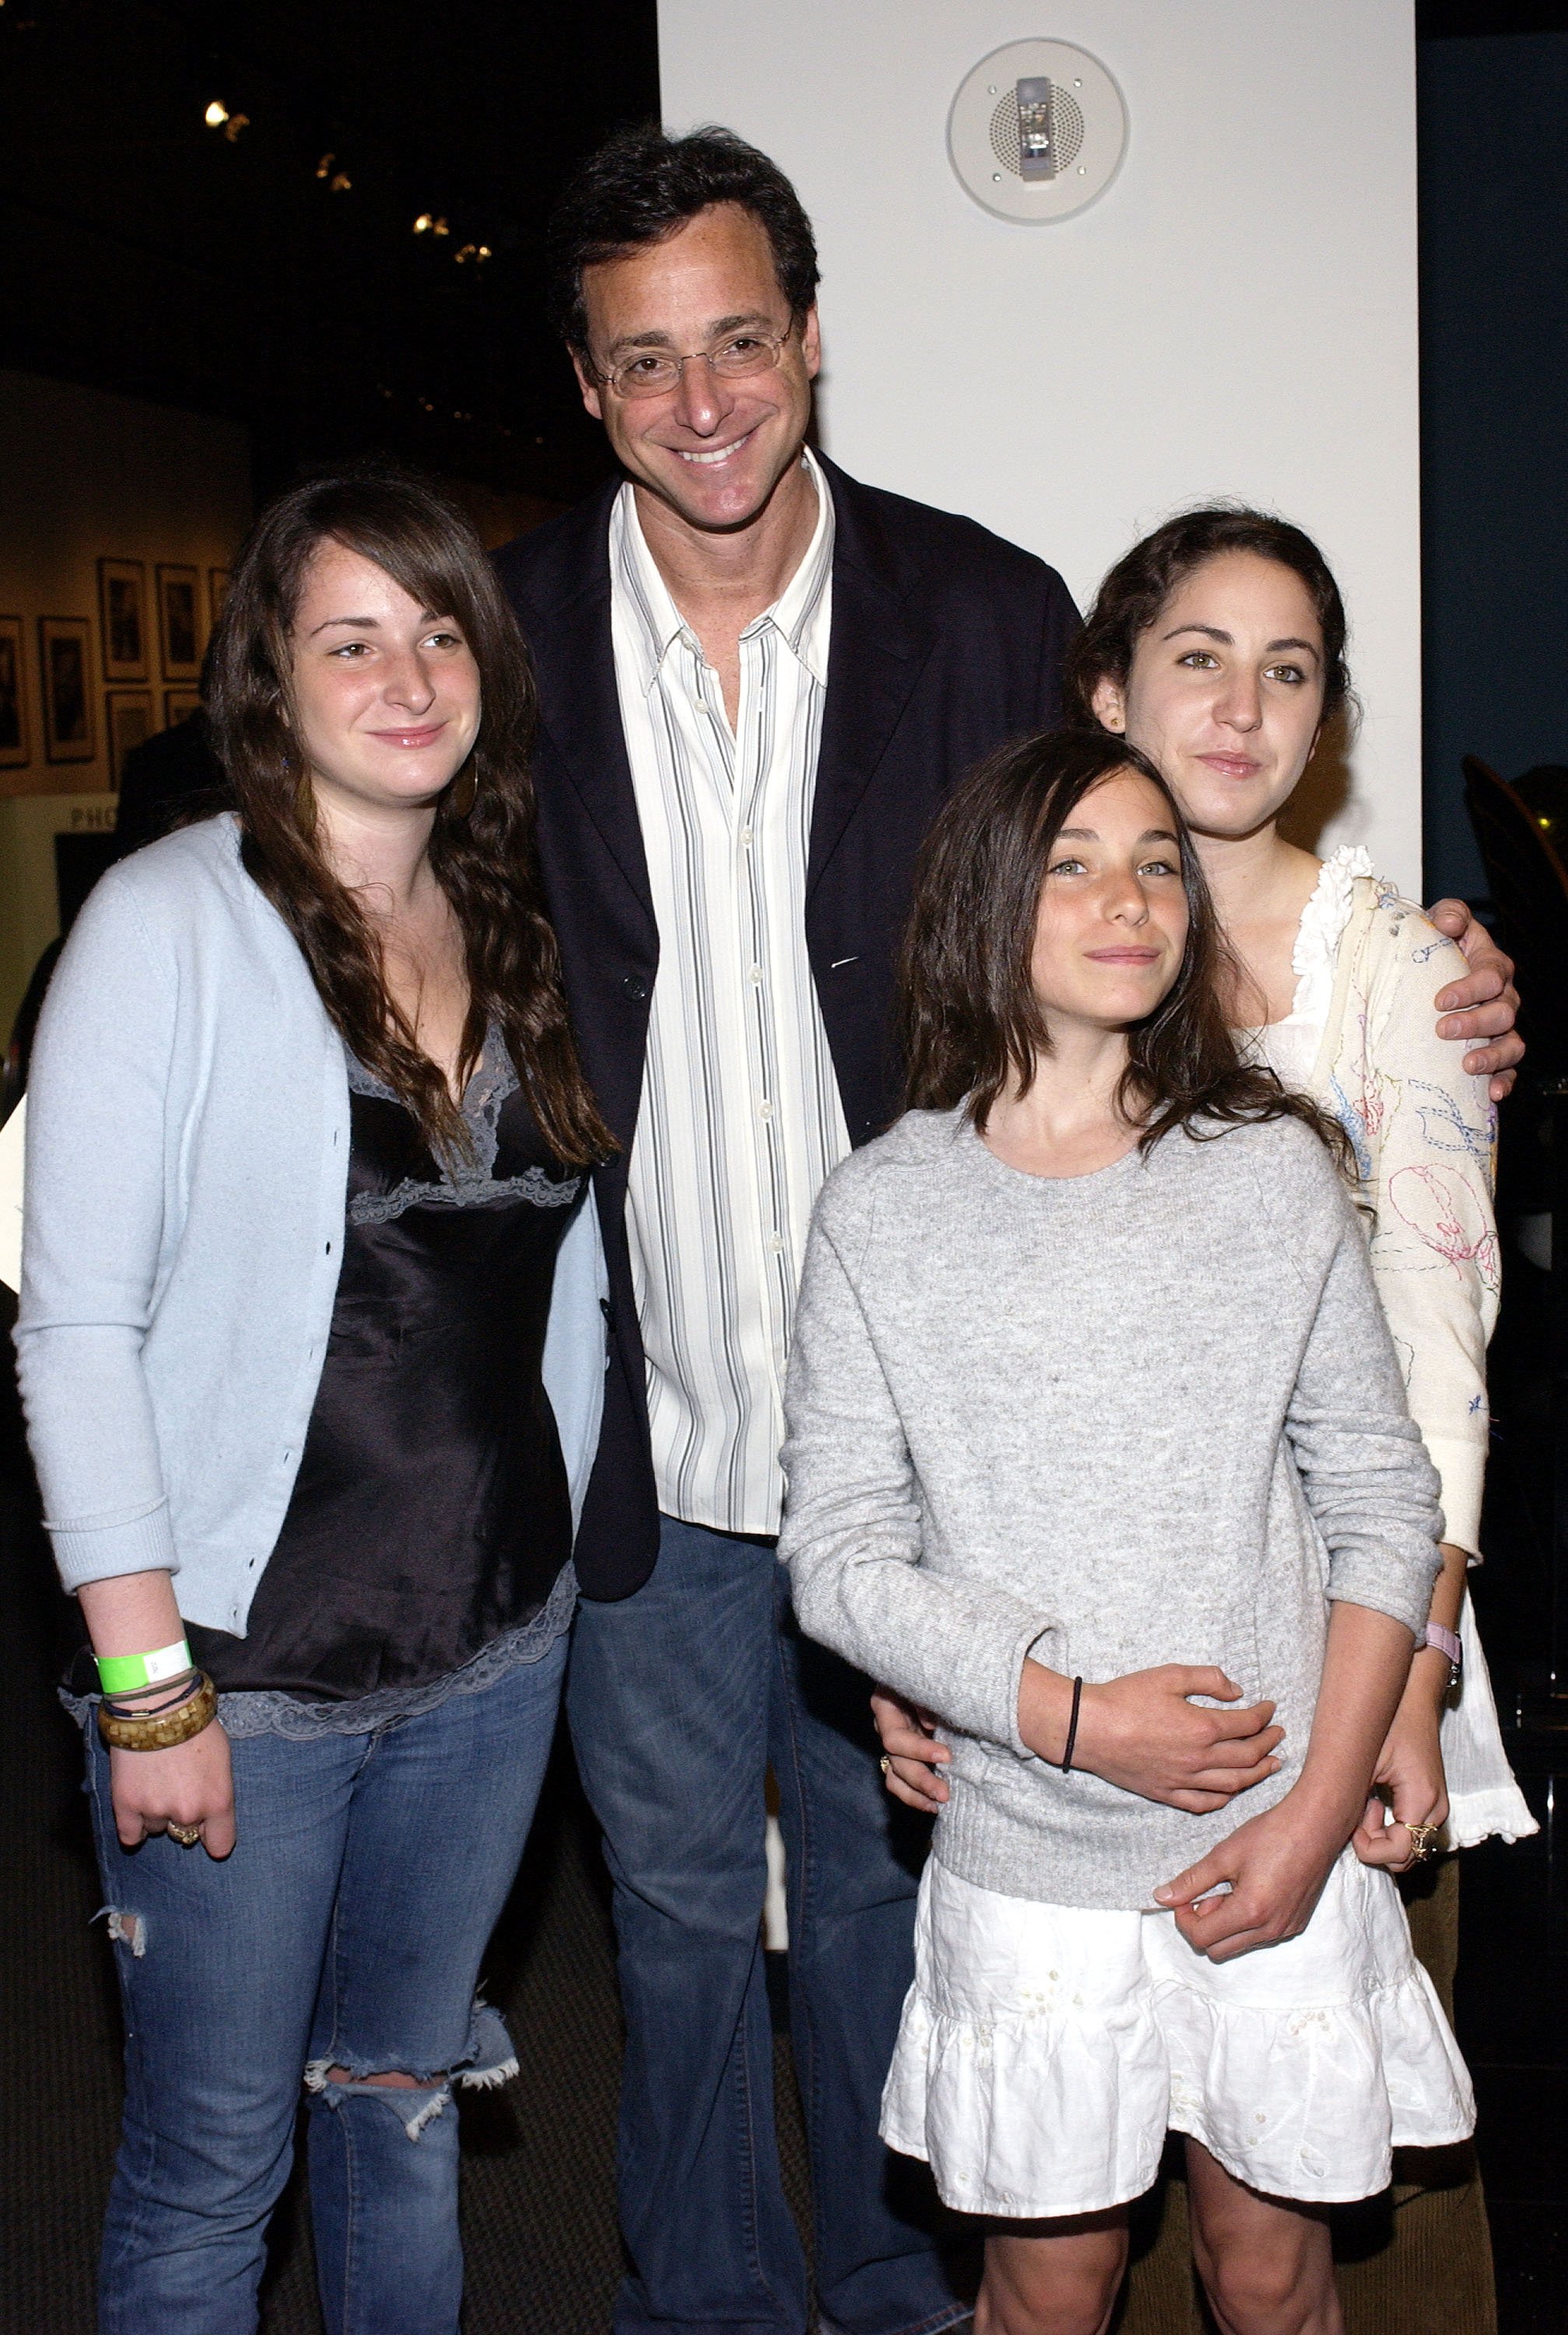 Bob Saget and his daughters Lara, Aubrey, and Jennie arrive at the Golden Dads Awards ceremony on June 15, 2005, in Los Angeles, California. | Source: Getty Images